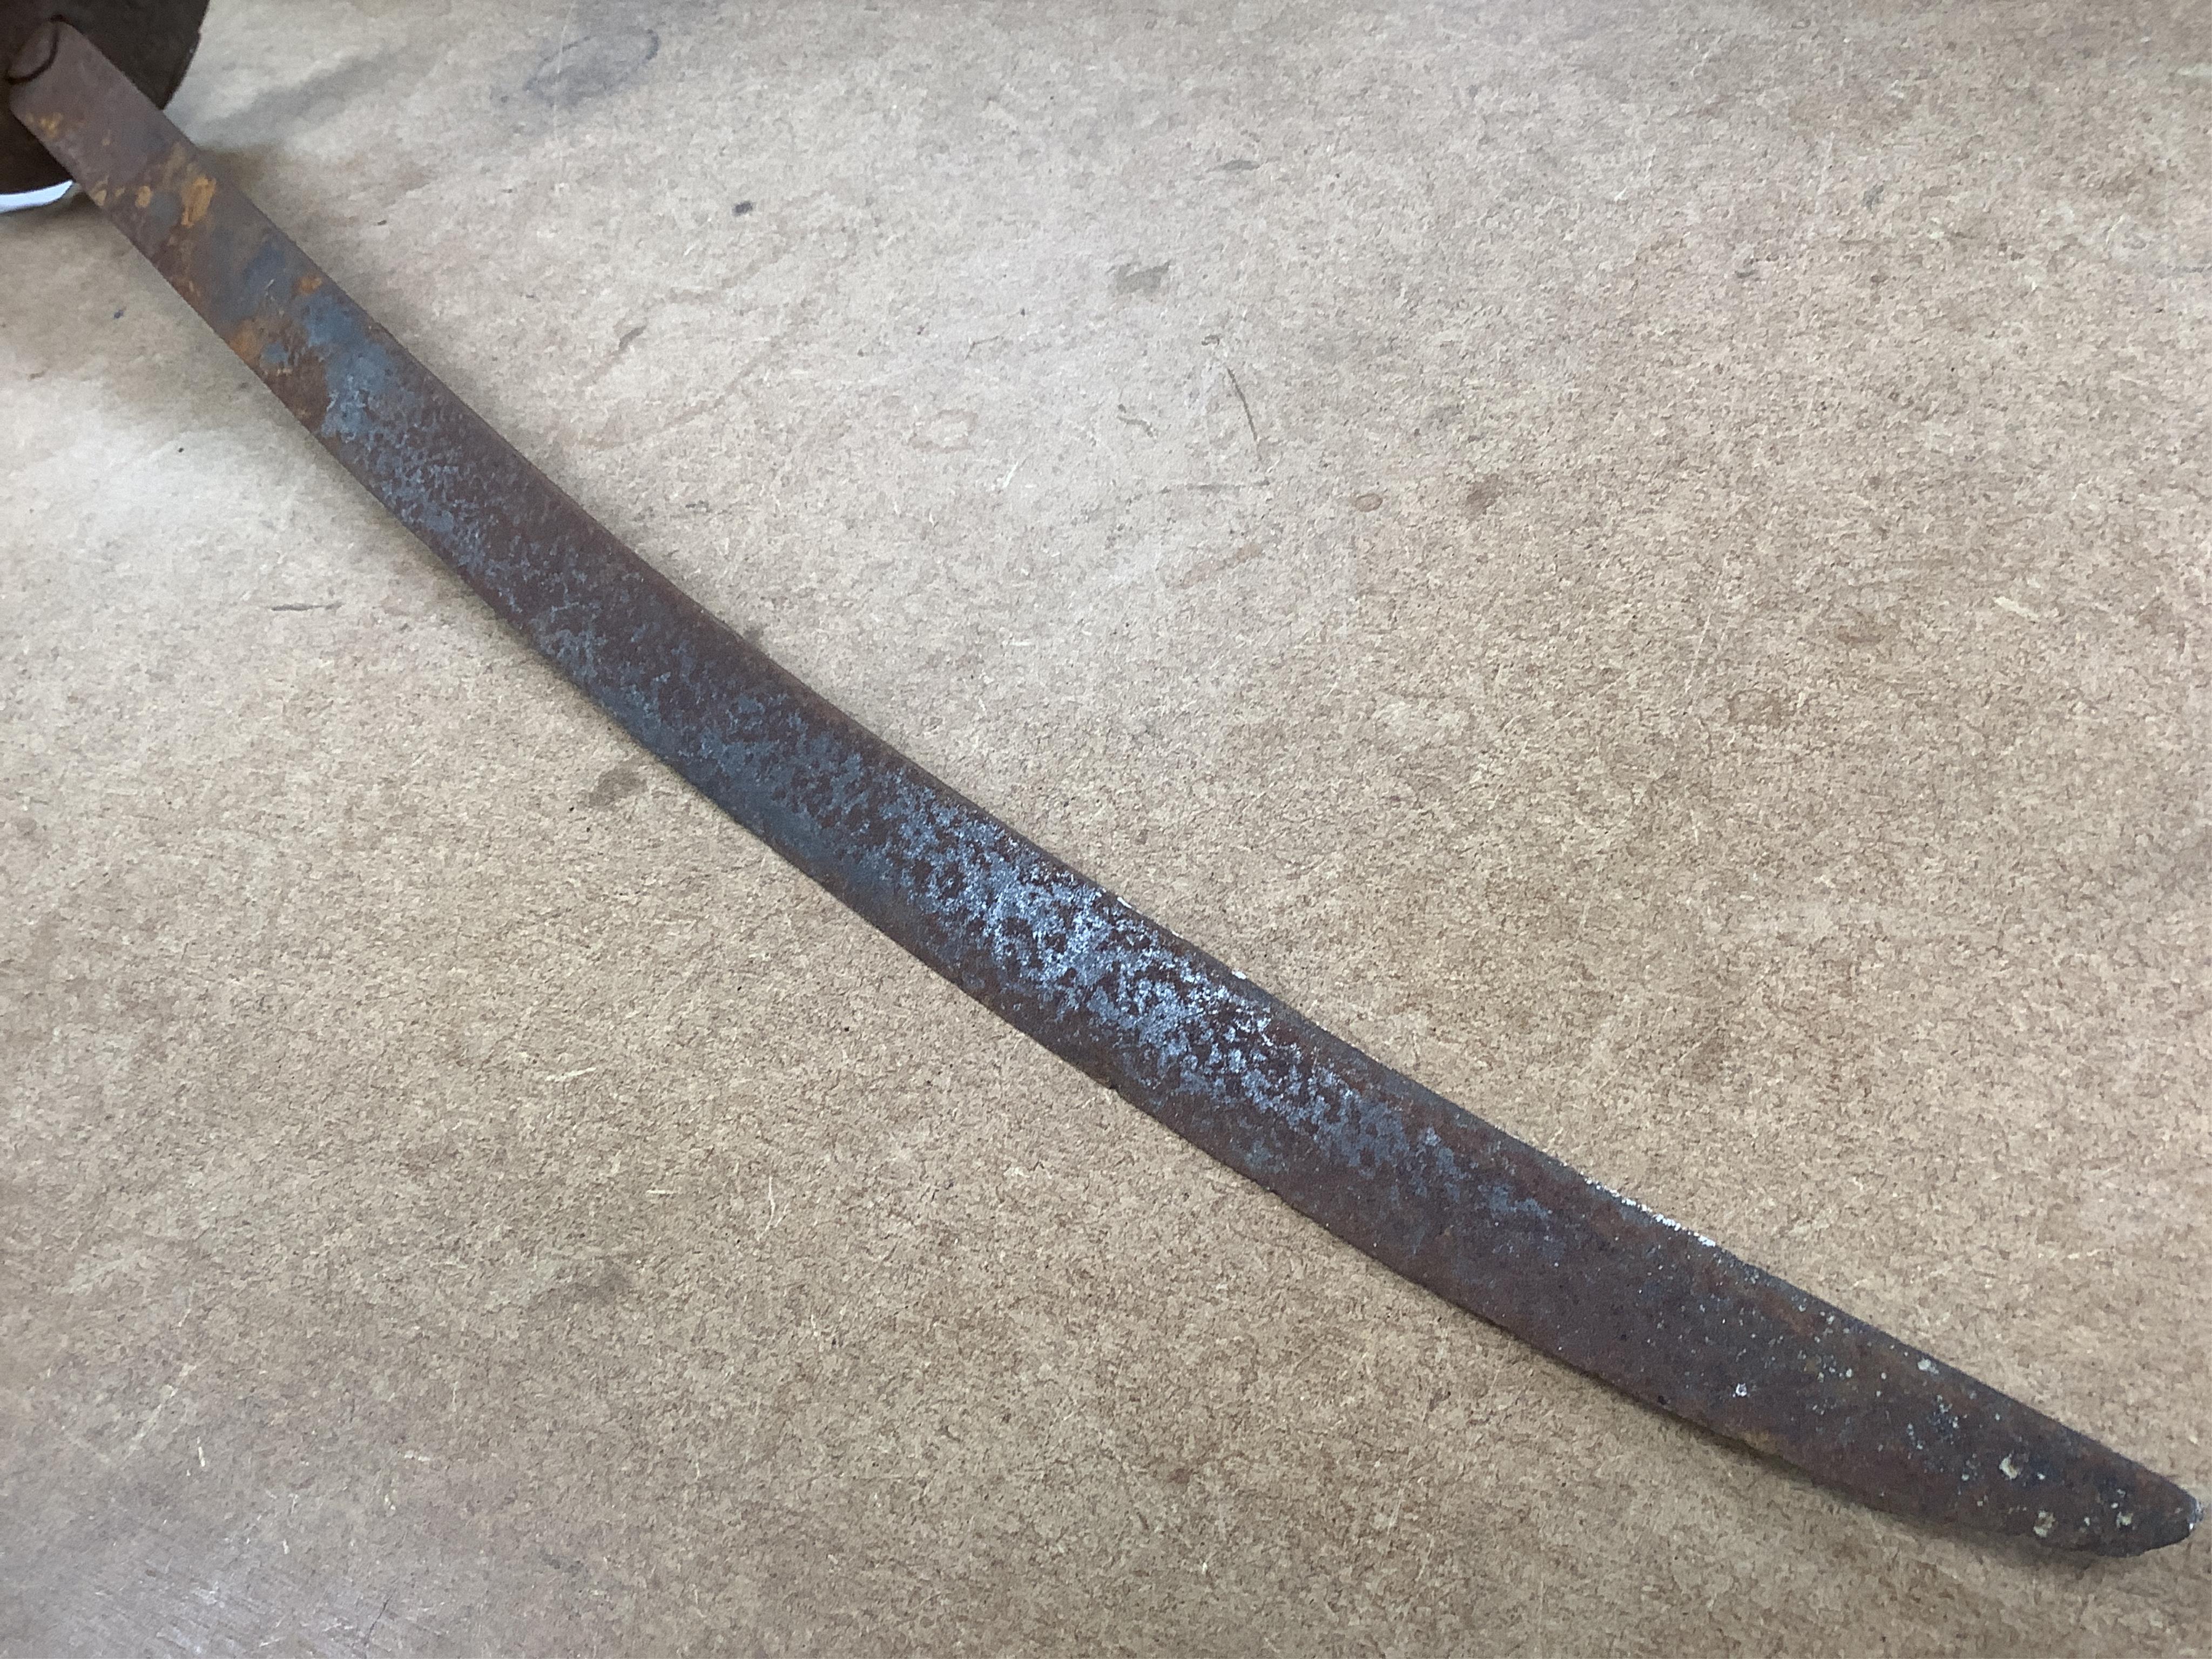 An English Civil War period cavalry officer’s sabre, curved single edge blade, struck with crescent moon, ‘mortuary’ hilt chiselled with scrolling foliage, swollen chiselled pommel, wooden grip, blade 71.5cm. Condition -